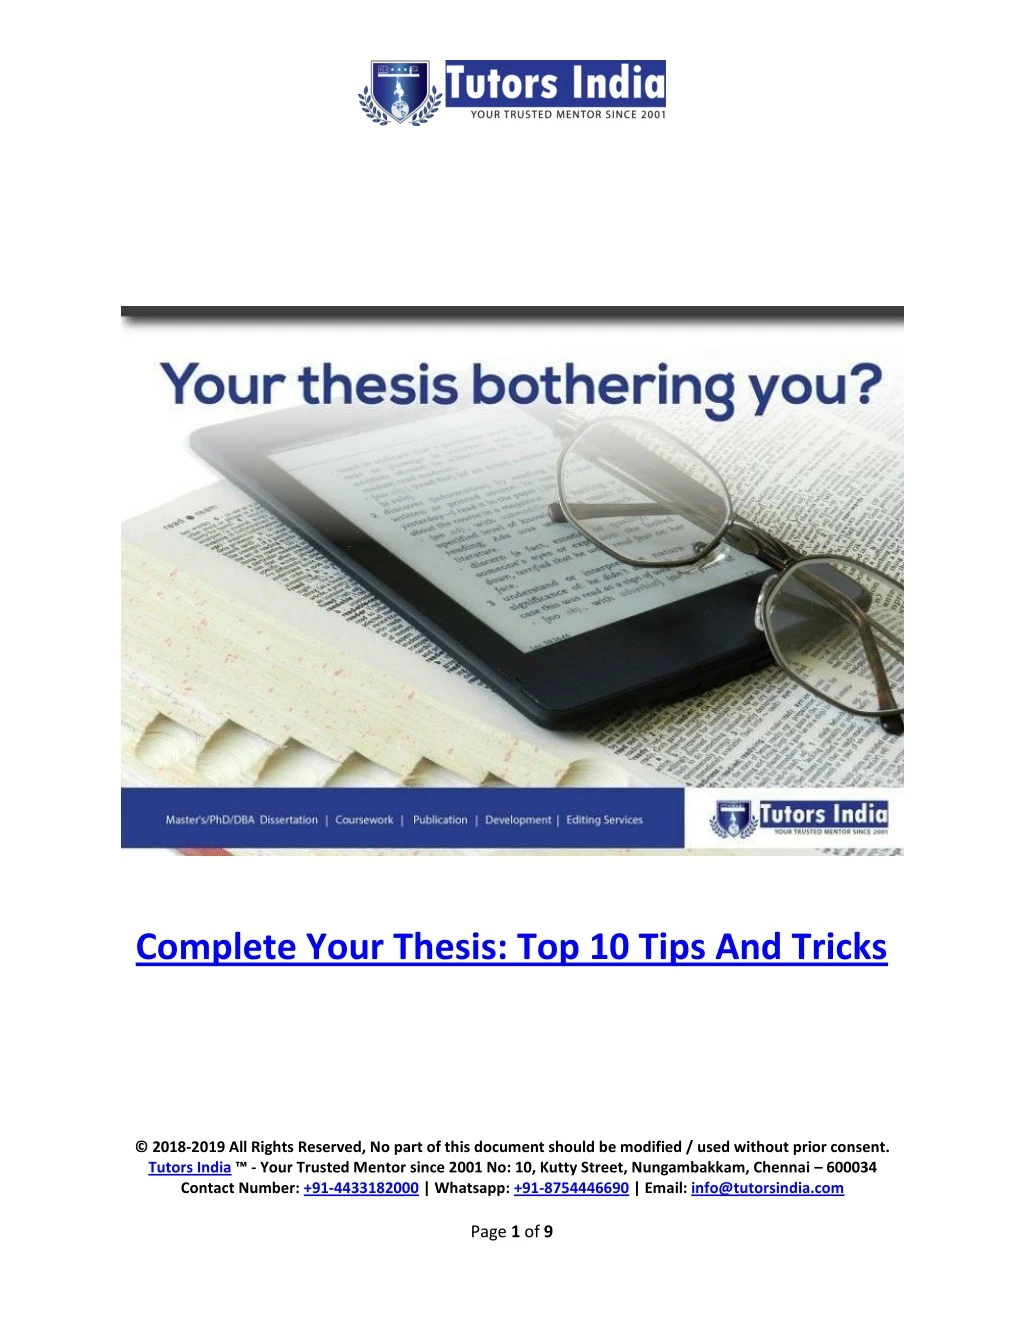 complete your thesis top 10 tips and tricks